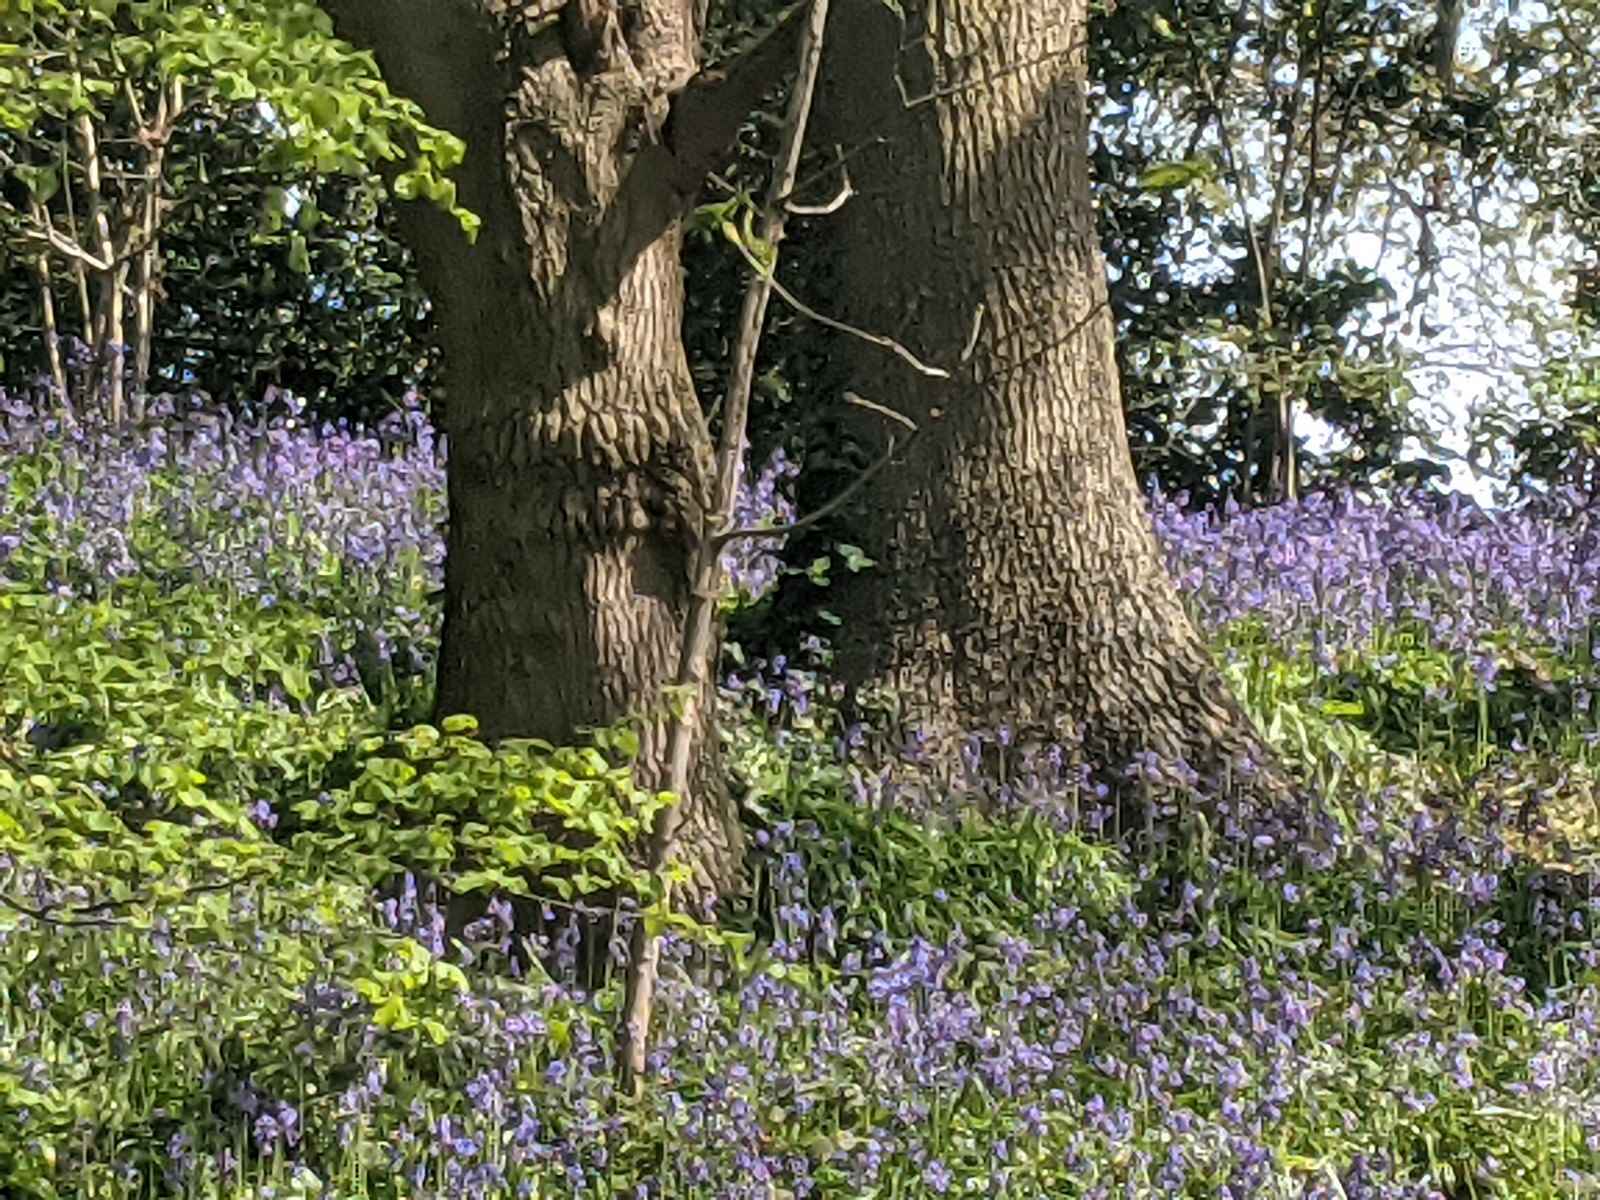 Bluebells in Mill Lane, April 25th 2021